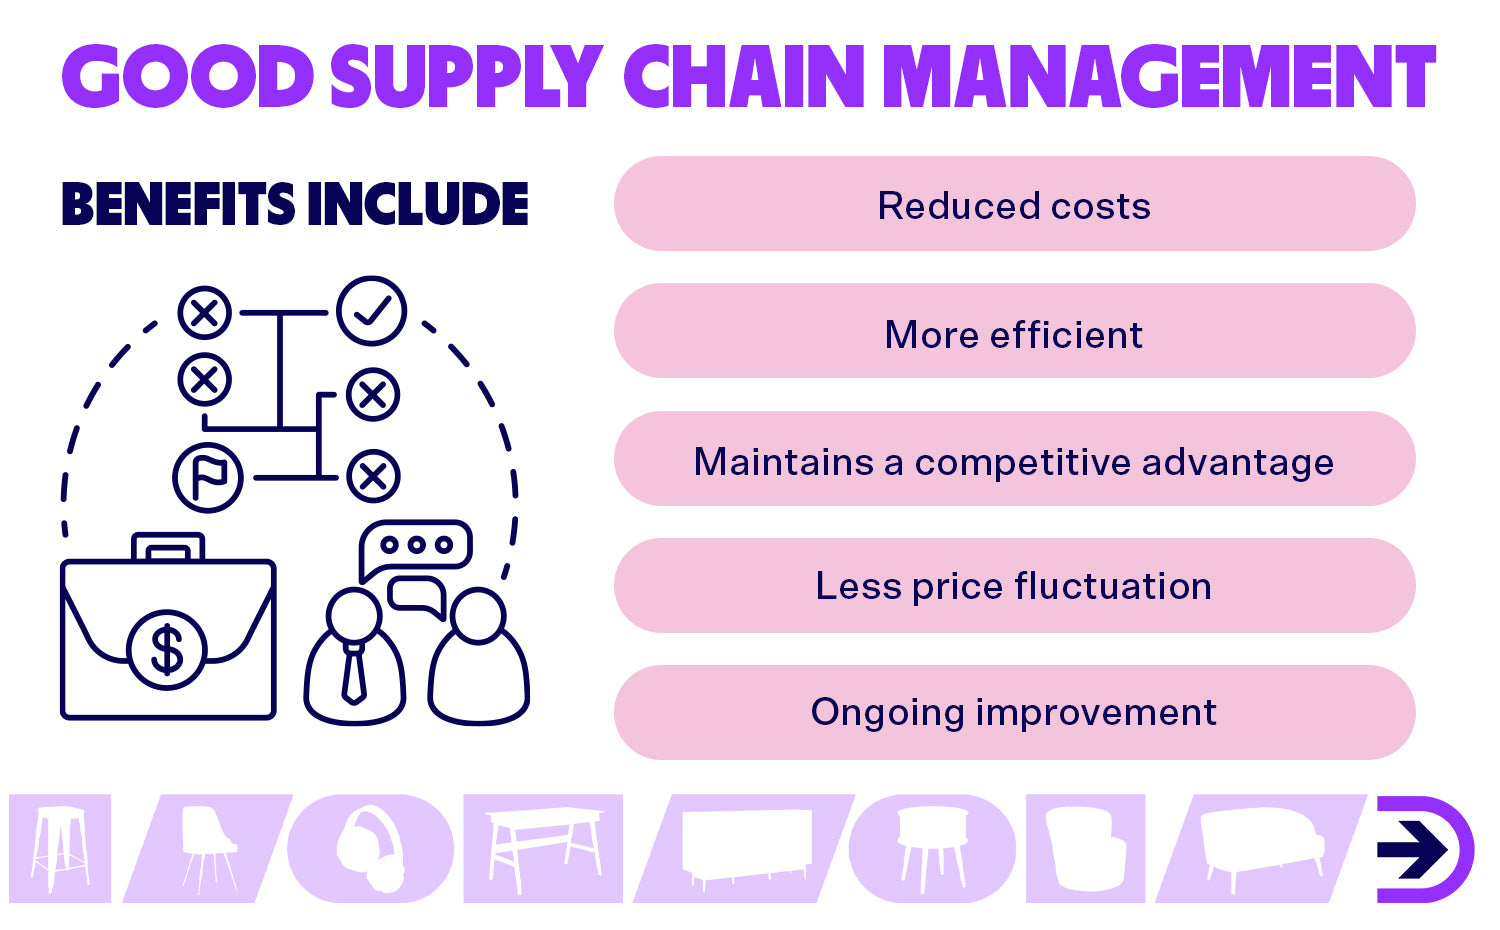 Save more in the long term by investing in good supply chain management and keep improving on your business operations.